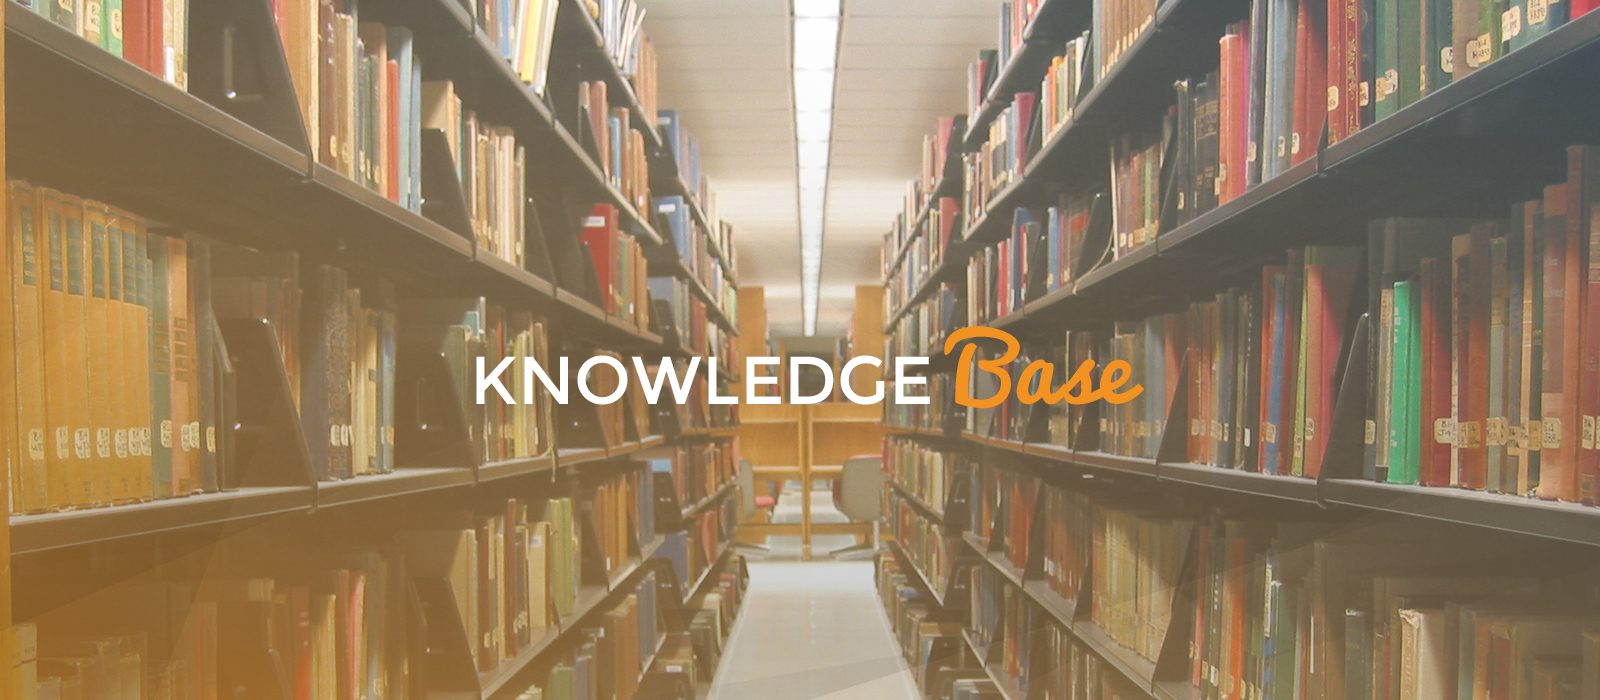 knowledge base header library books